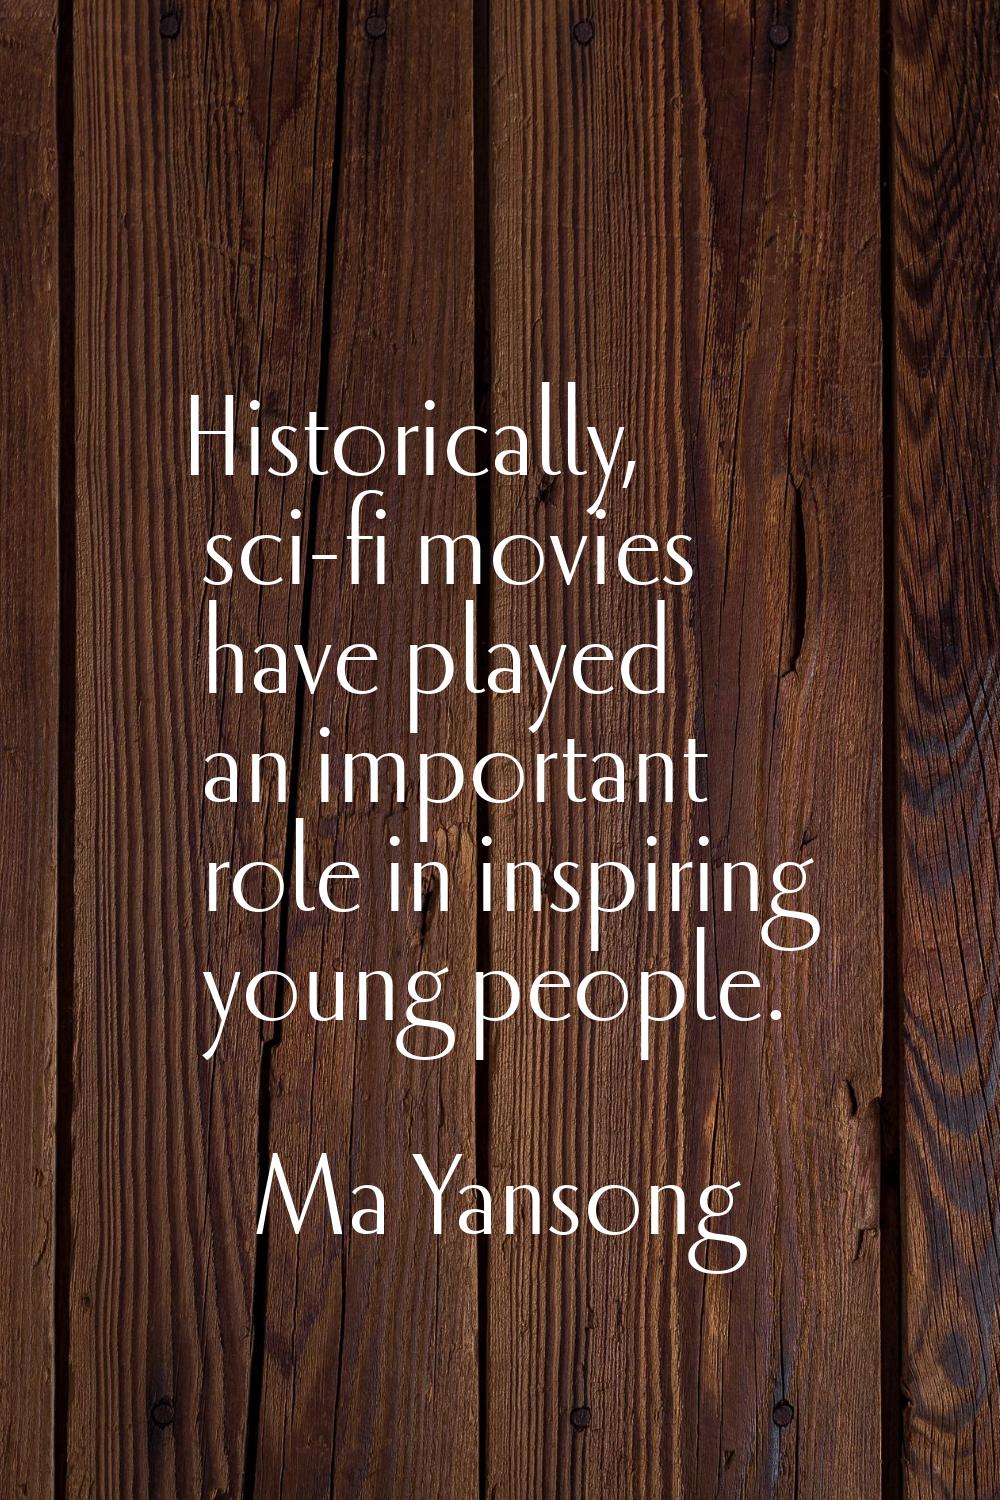 Historically, sci-fi movies have played an important role in inspiring young people.